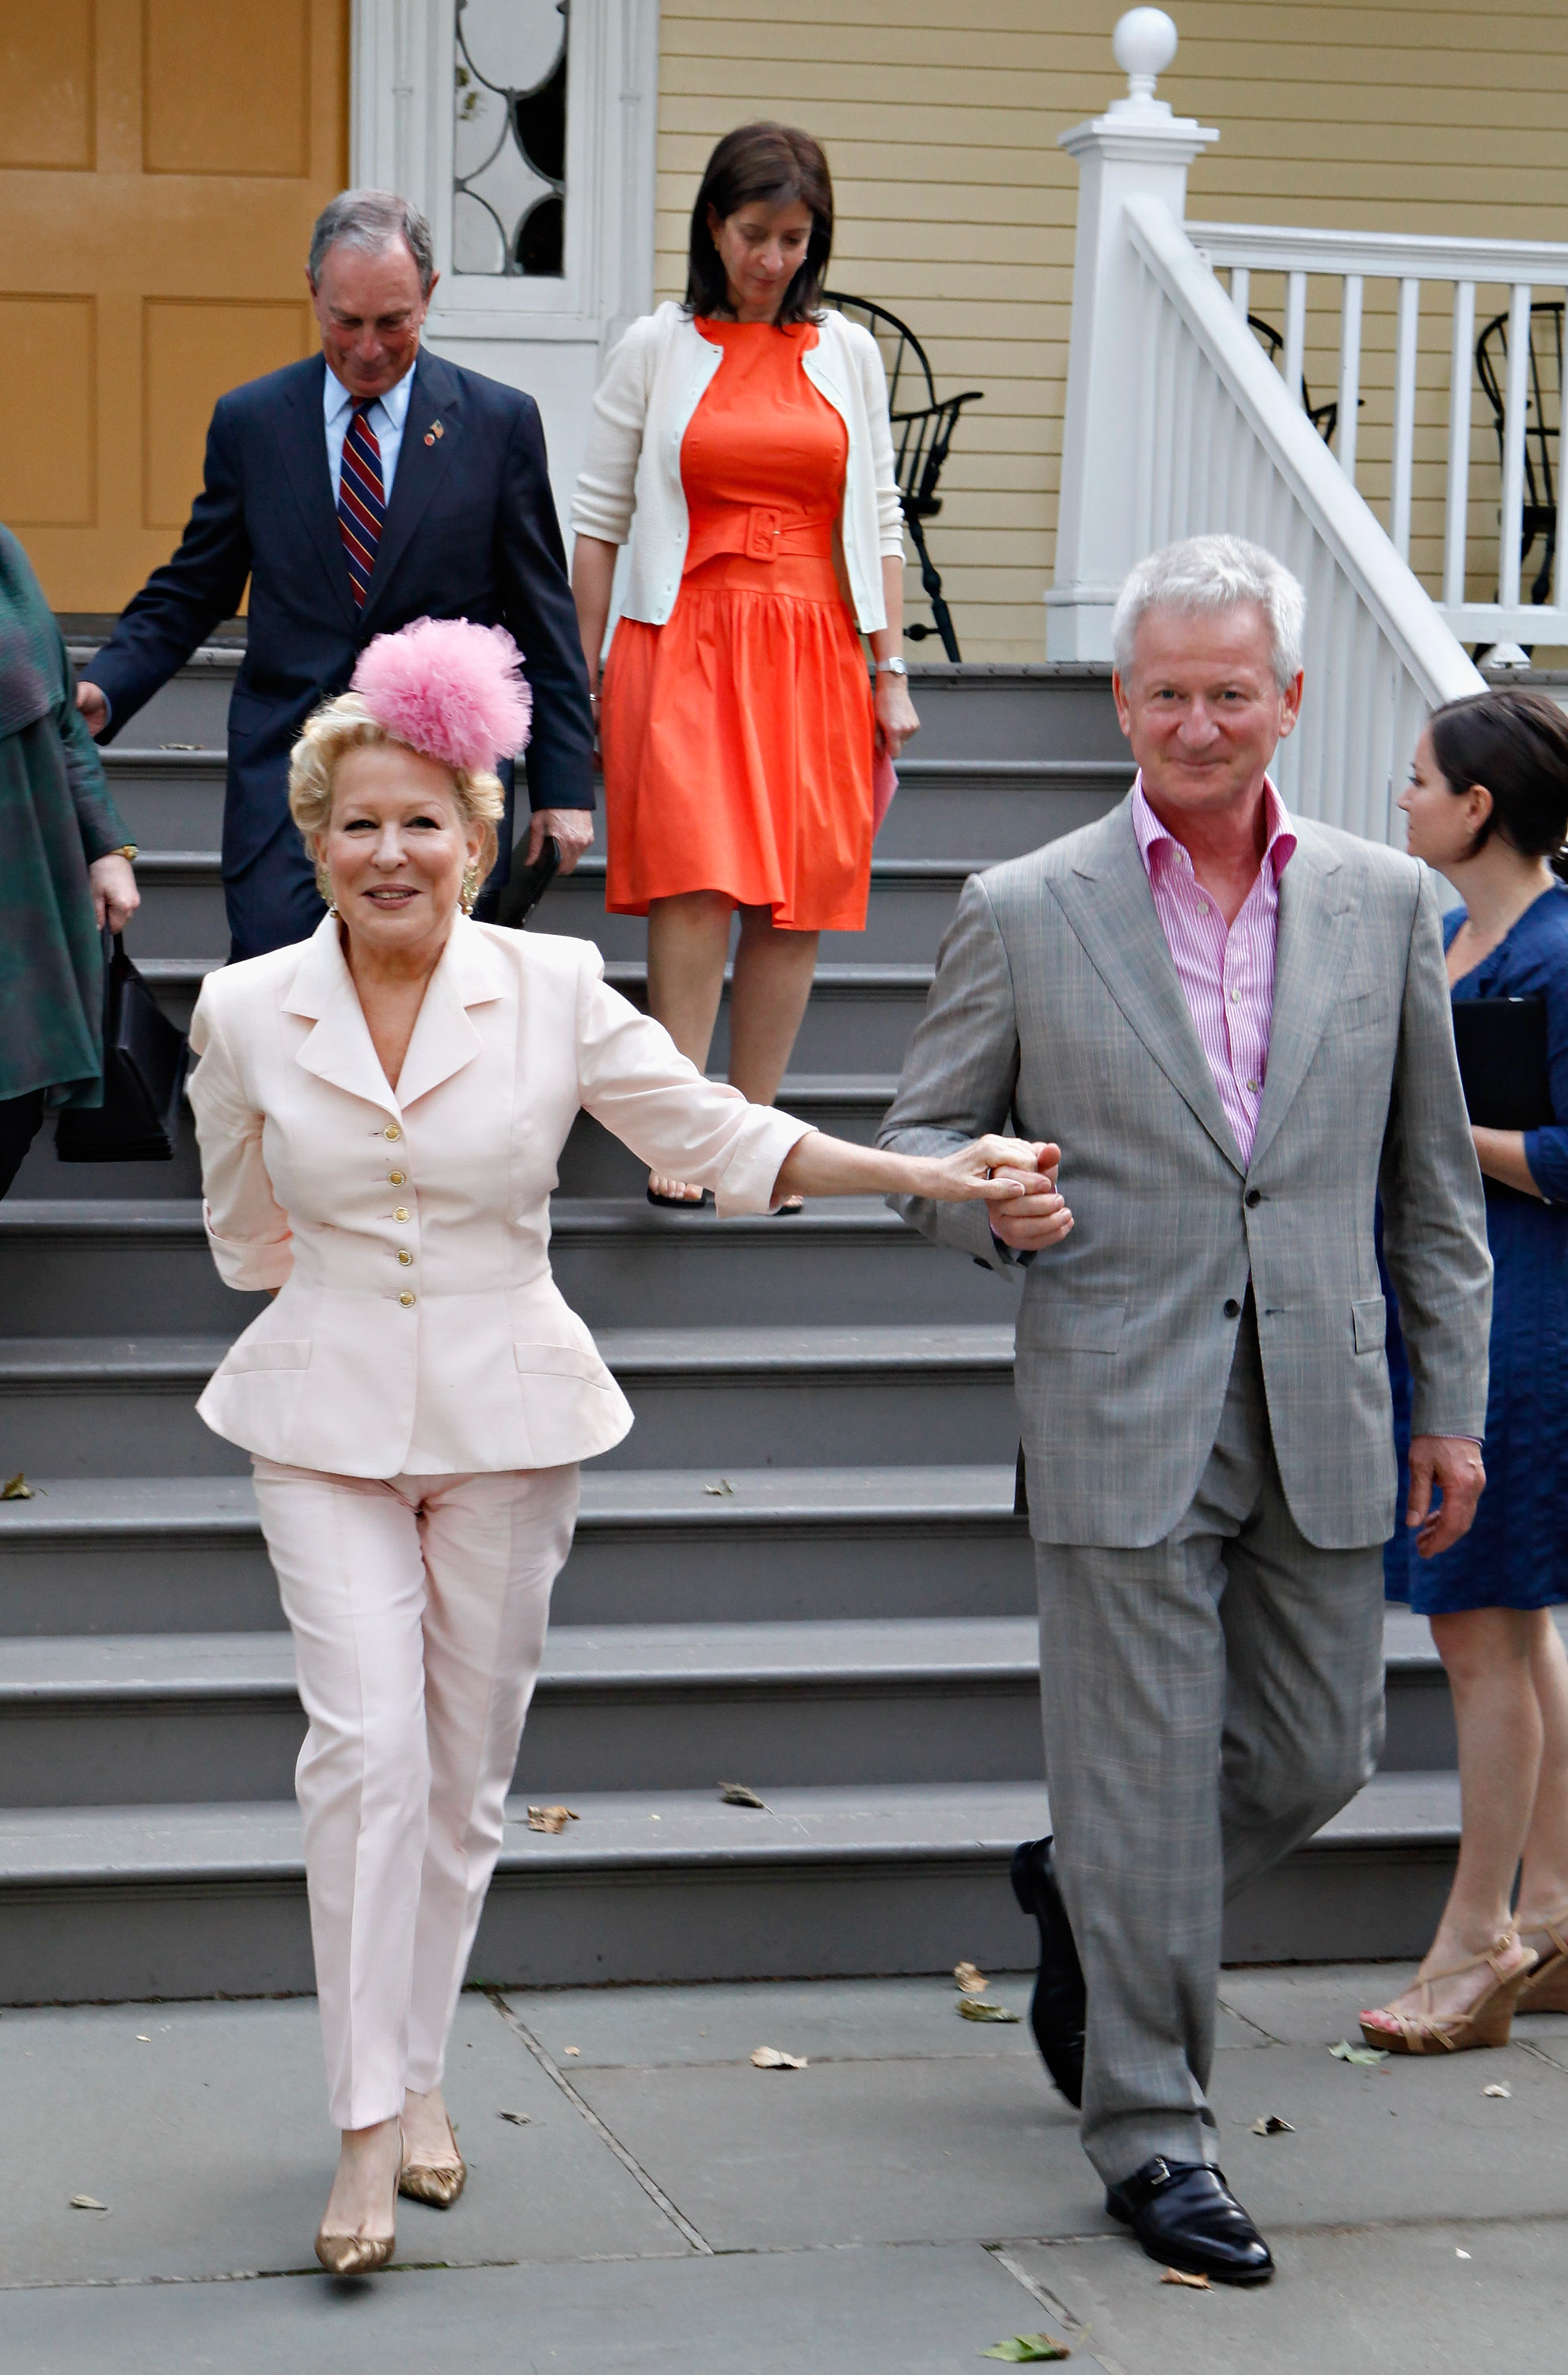 Bette Midler and her husband Martin von Haselberg attend the 2012 Doris C. Freedman Award Ceremony at Gracie Mansion on May 16, 2012 in New York City. | Source: Getty Images